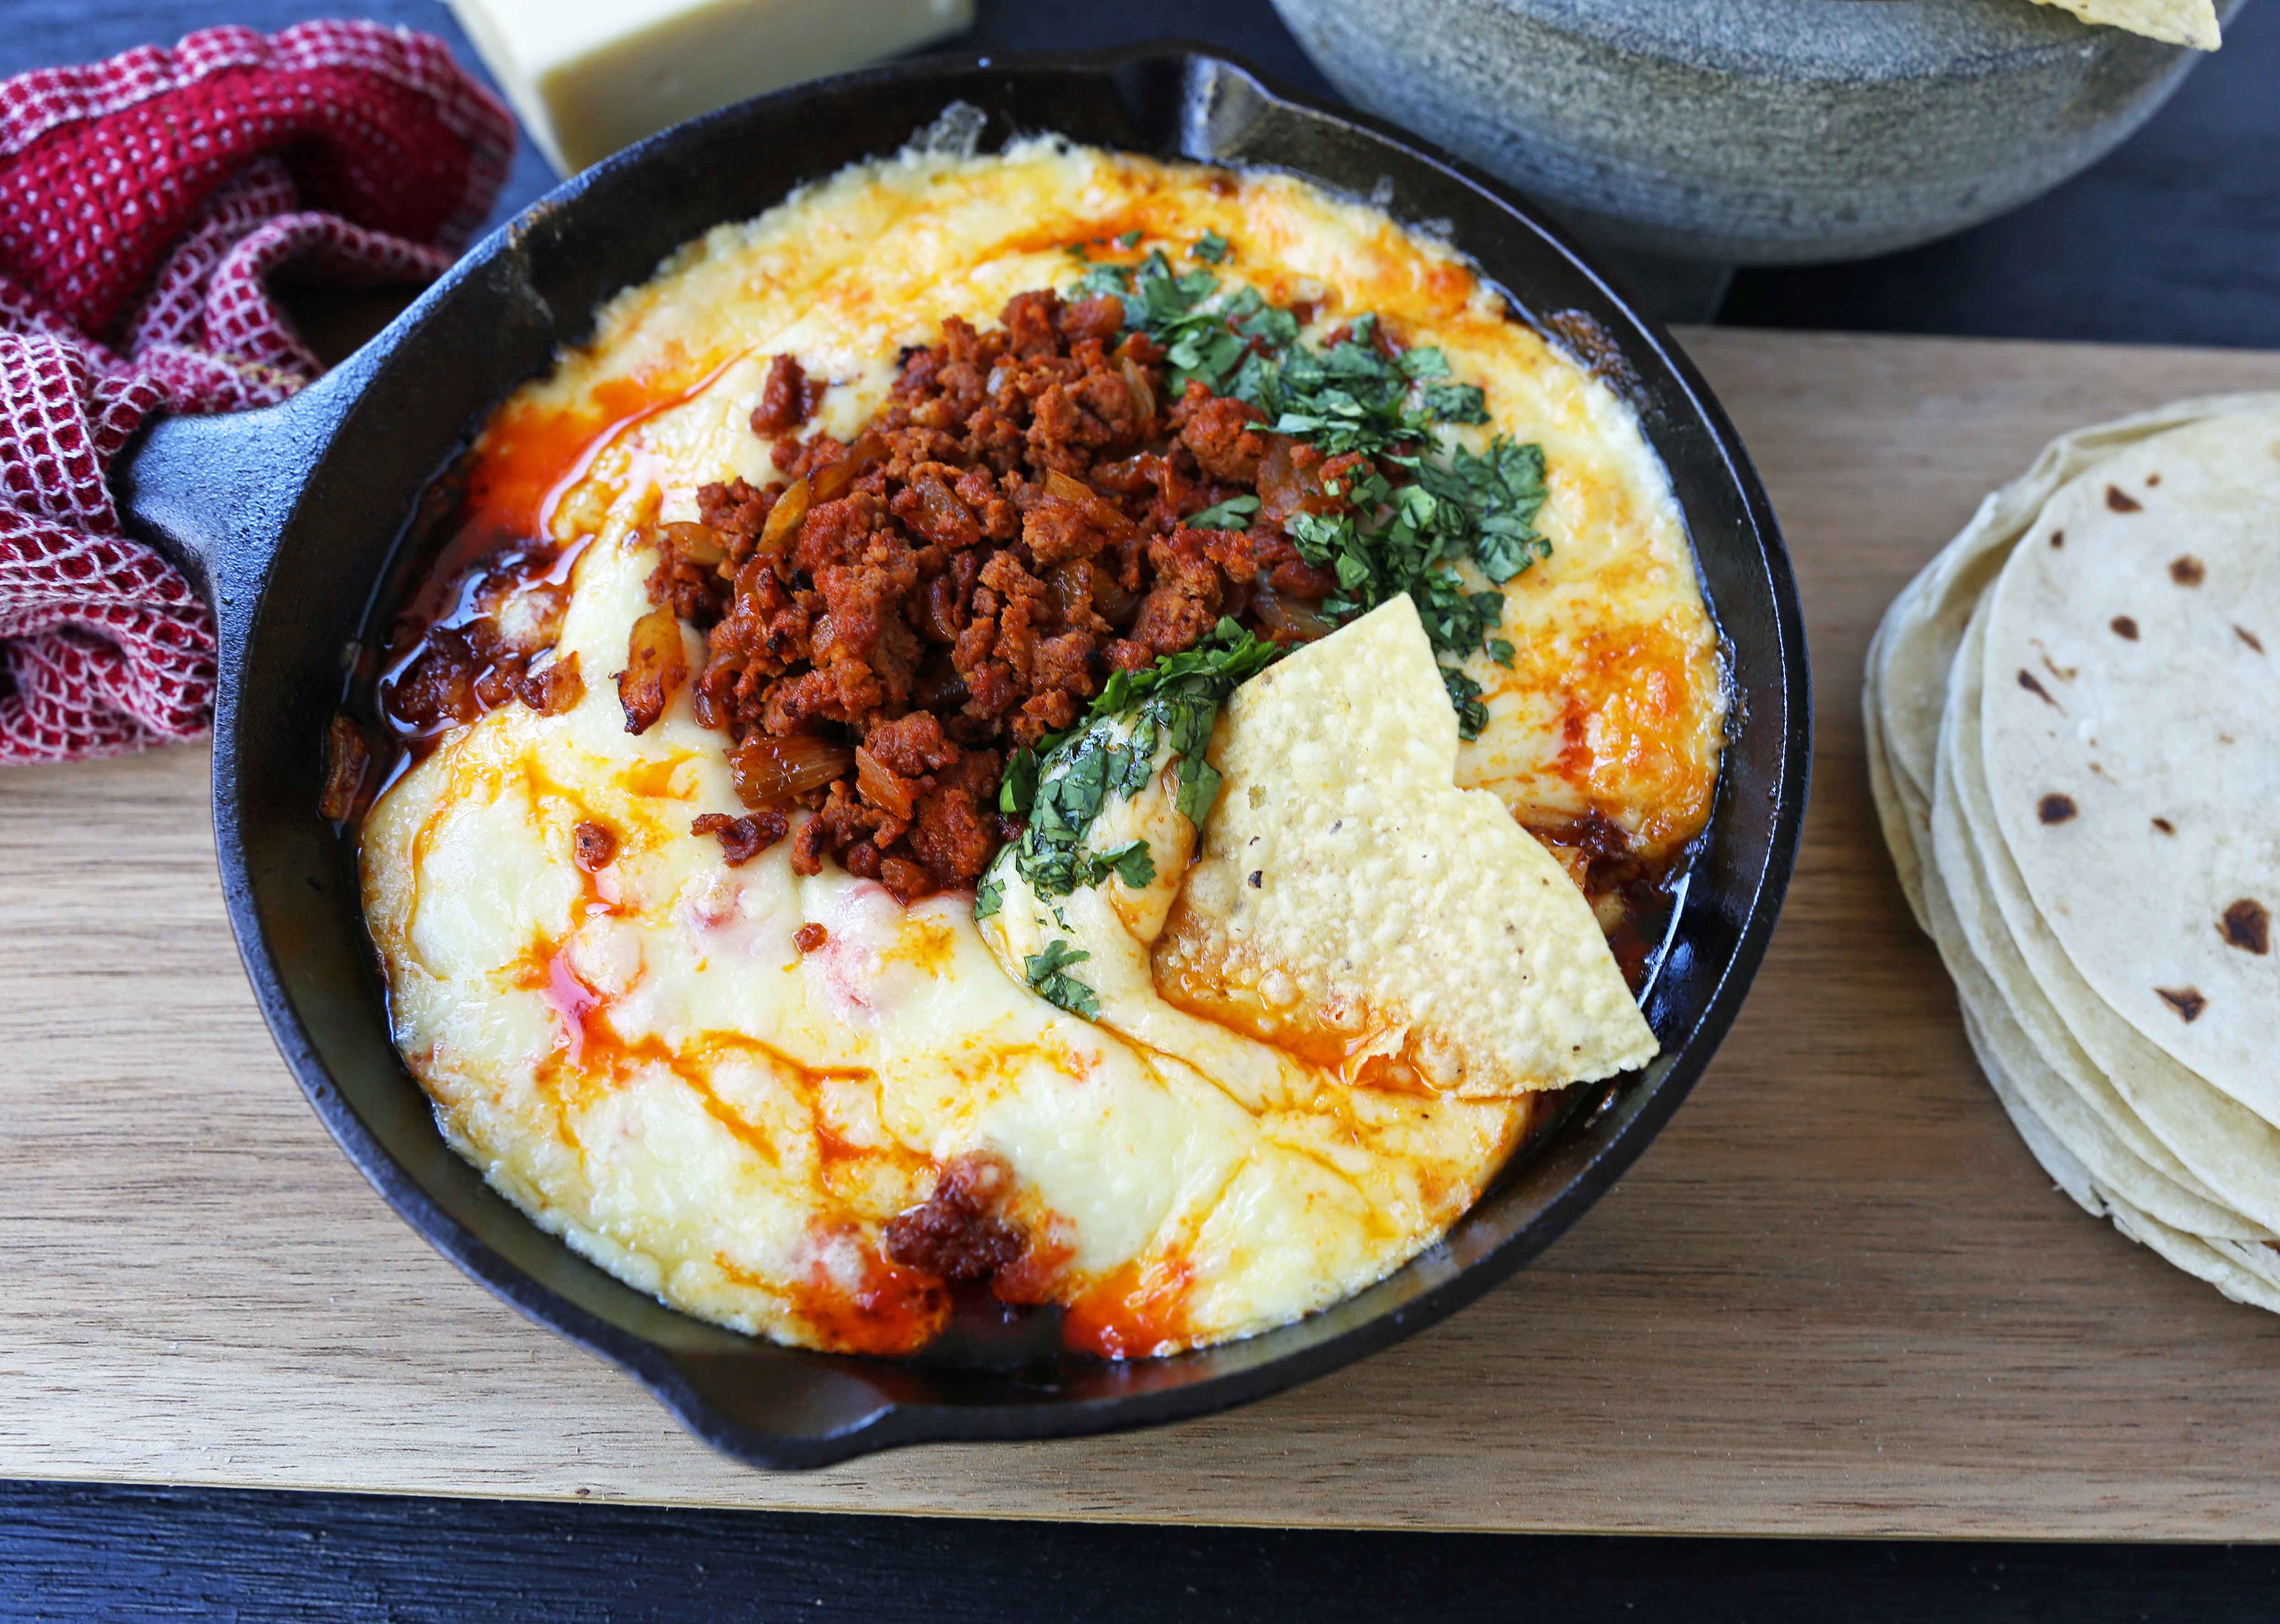 Queso Fundido with Chorizo. A skillet of melted Mexican cheeses seasoned with peppers, onions, and spicy Mexican chorizo sausage and served with hot tortillas or chips. The perfect Mexican appetizer! www.modernhoney.com #appetizer #appetizers #mexican #mexicanfood #queso #quesofundido